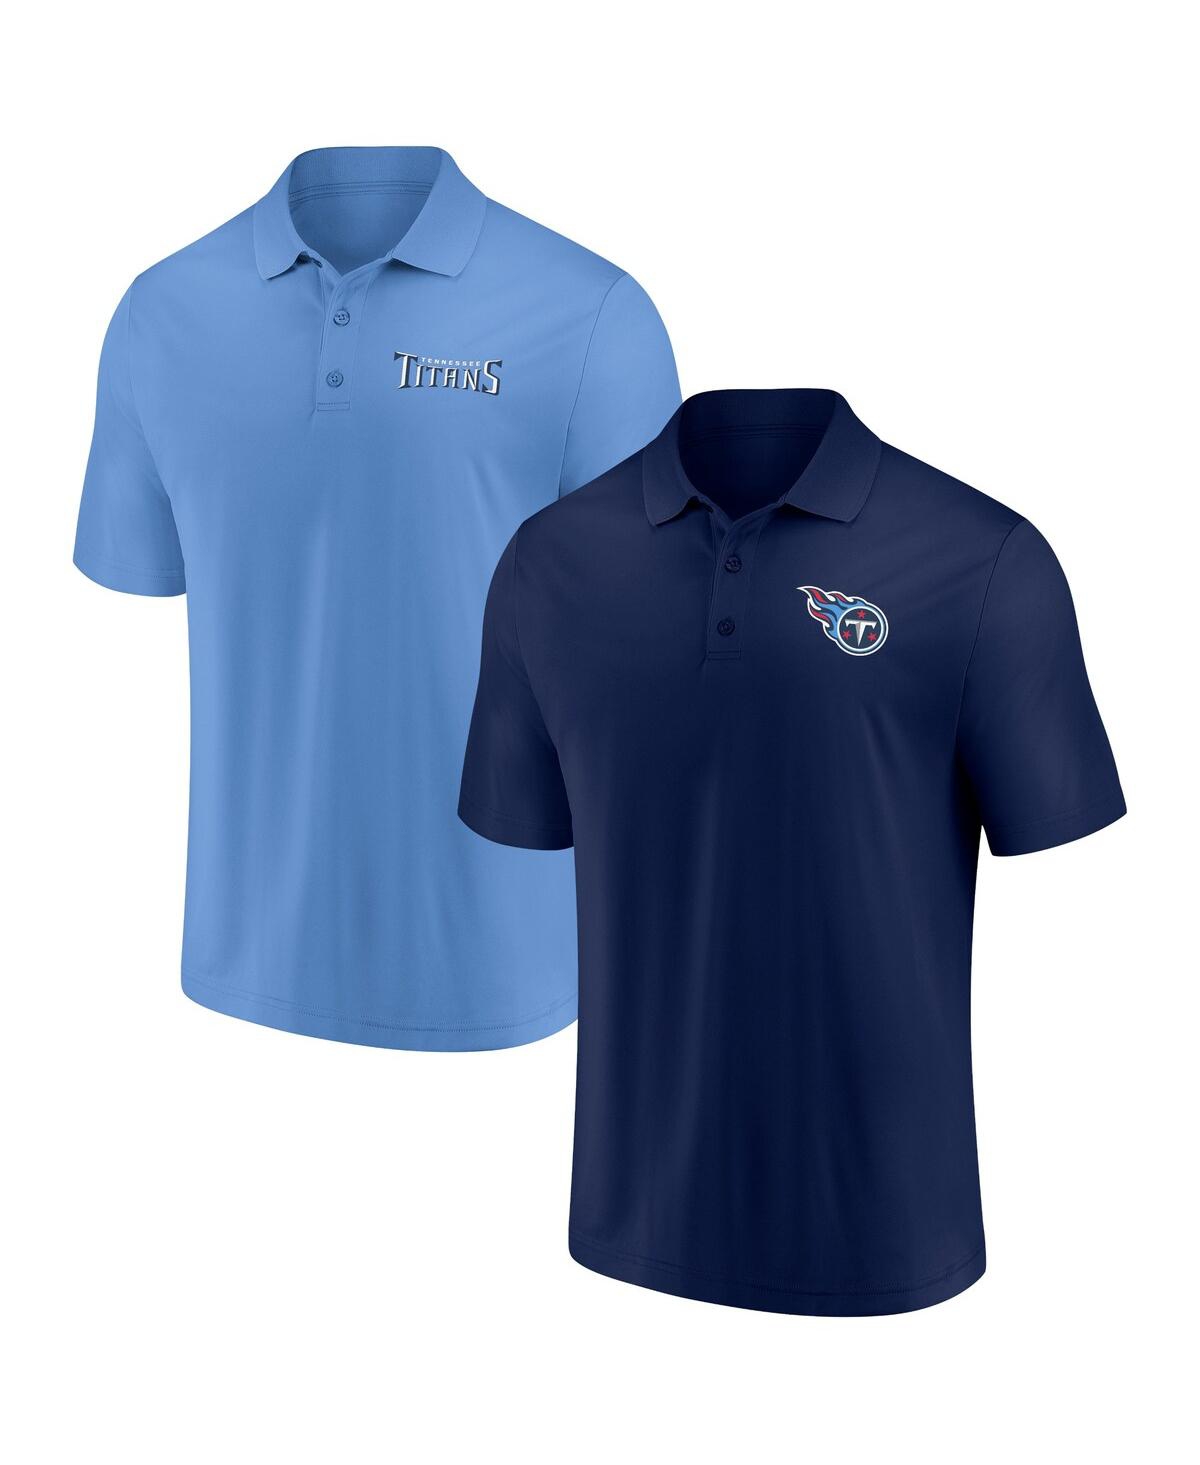 Fanatics Men's  Navy, Light Blue Tennessee Titans Dueling Two-pack Polo Shirt Set In Navy,light Blue